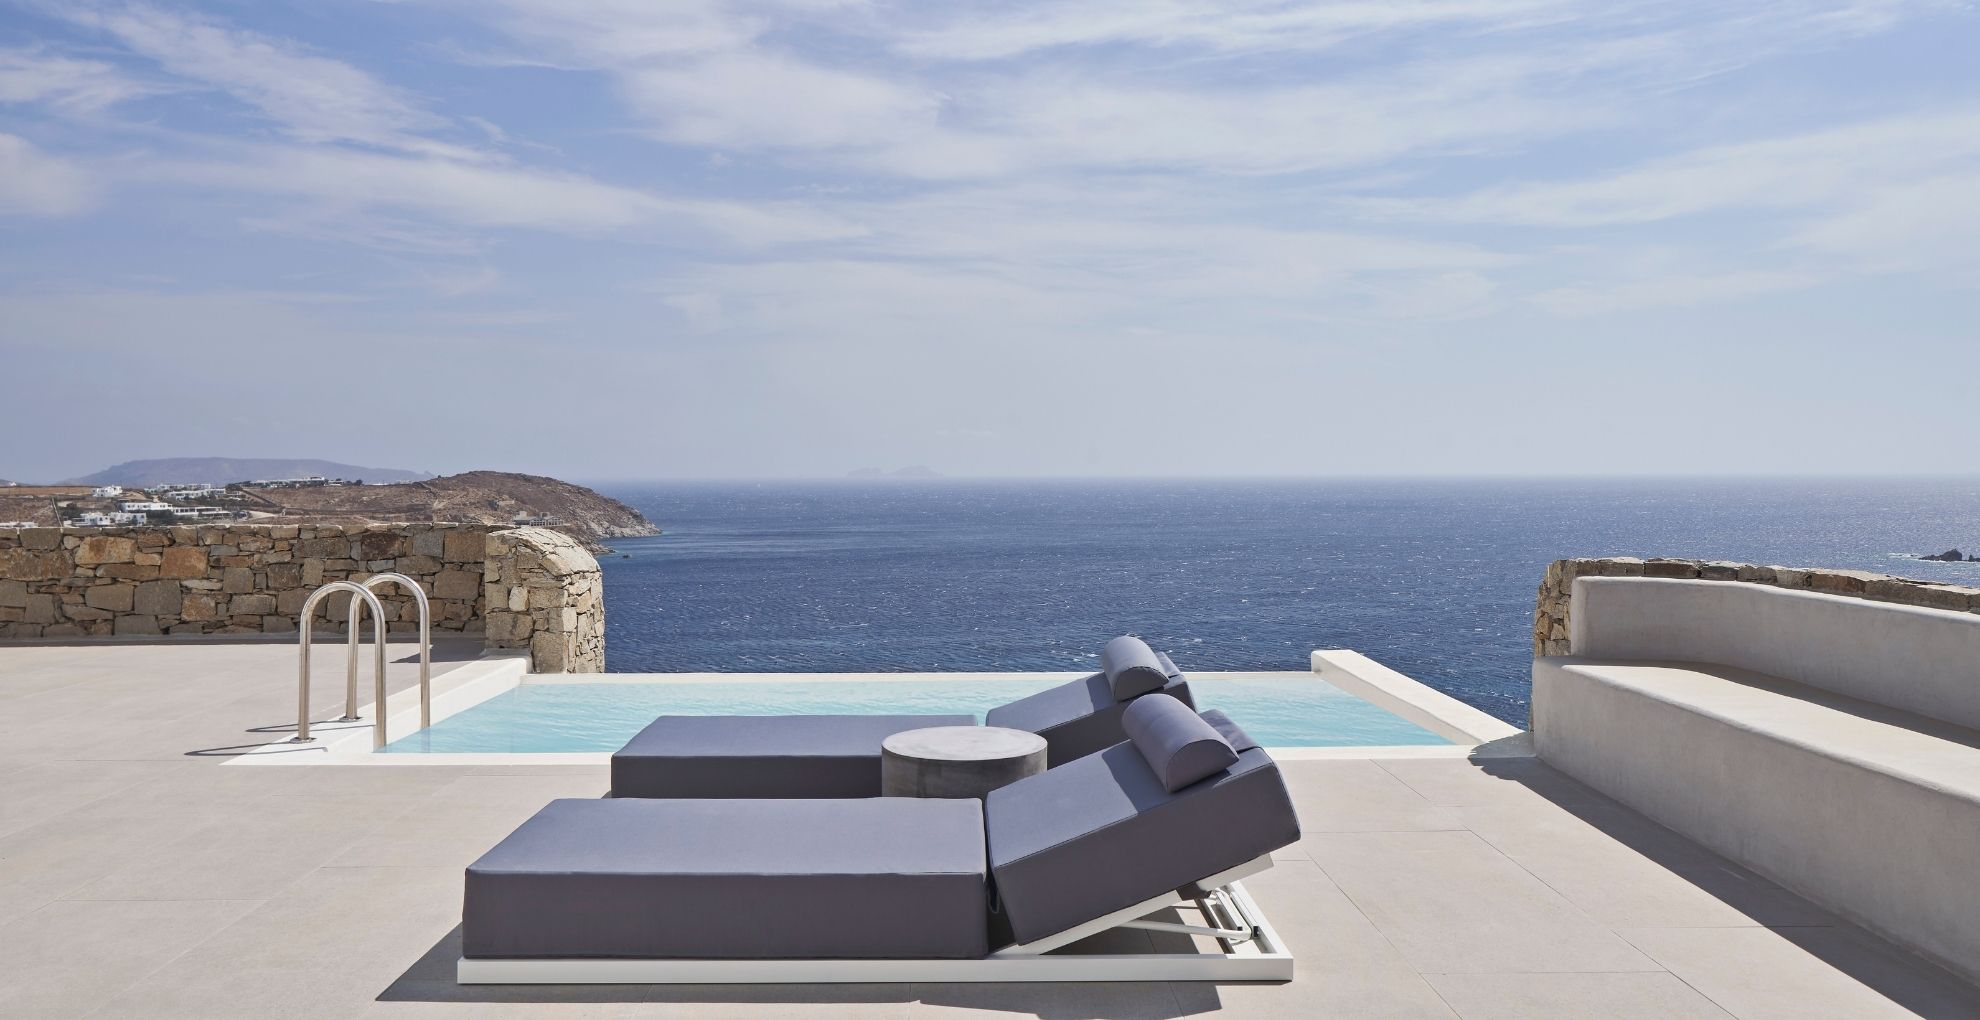 Radisson Hotel Group expands resort portfolio in Greece with two new units